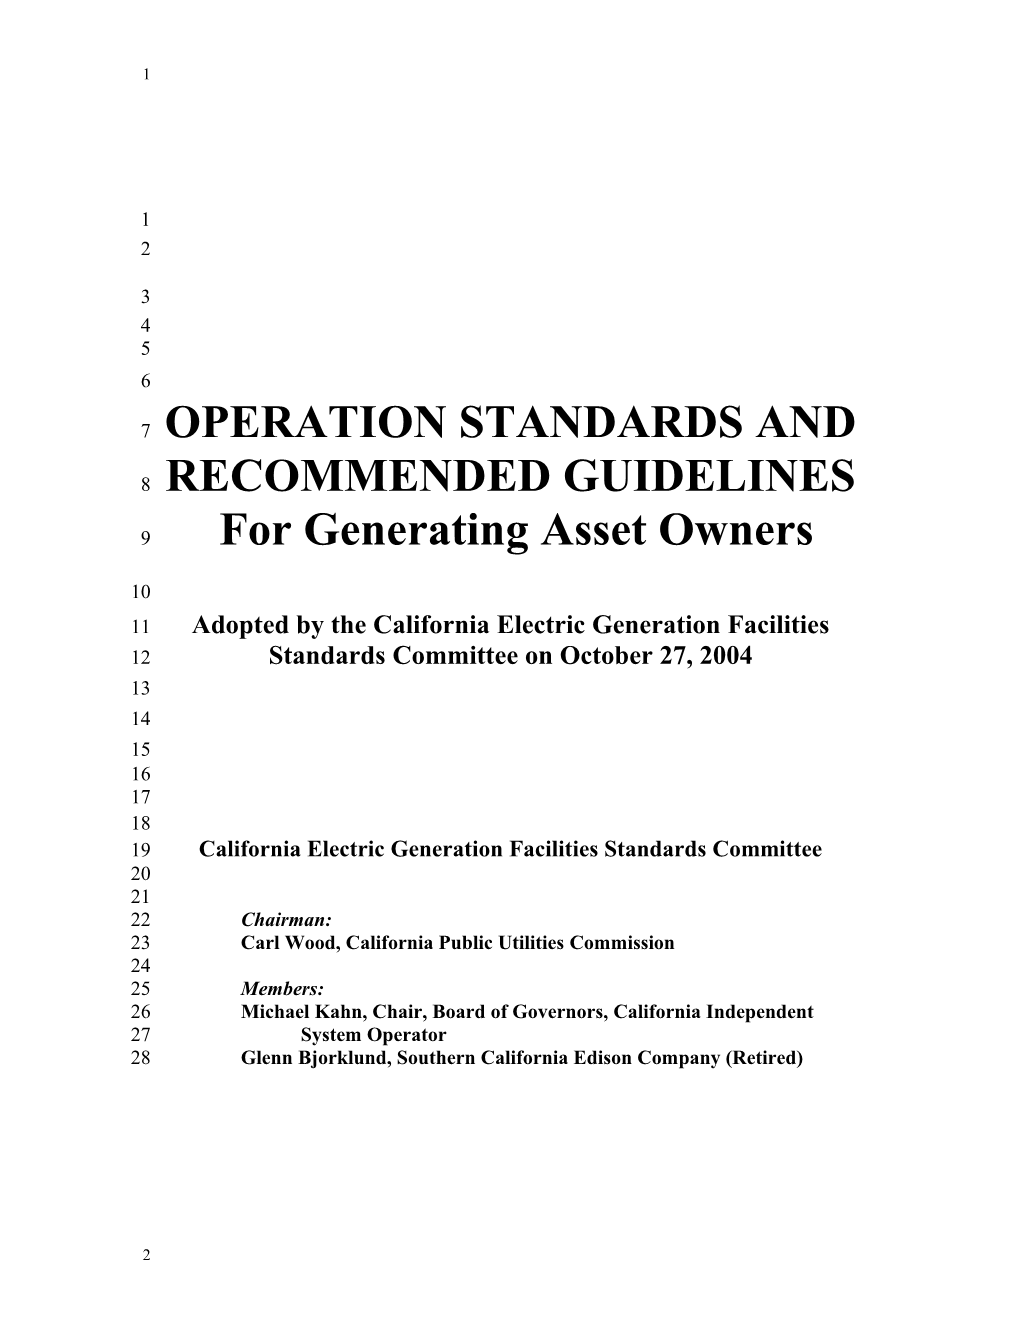 Operation Standards and Recommended Guidelines